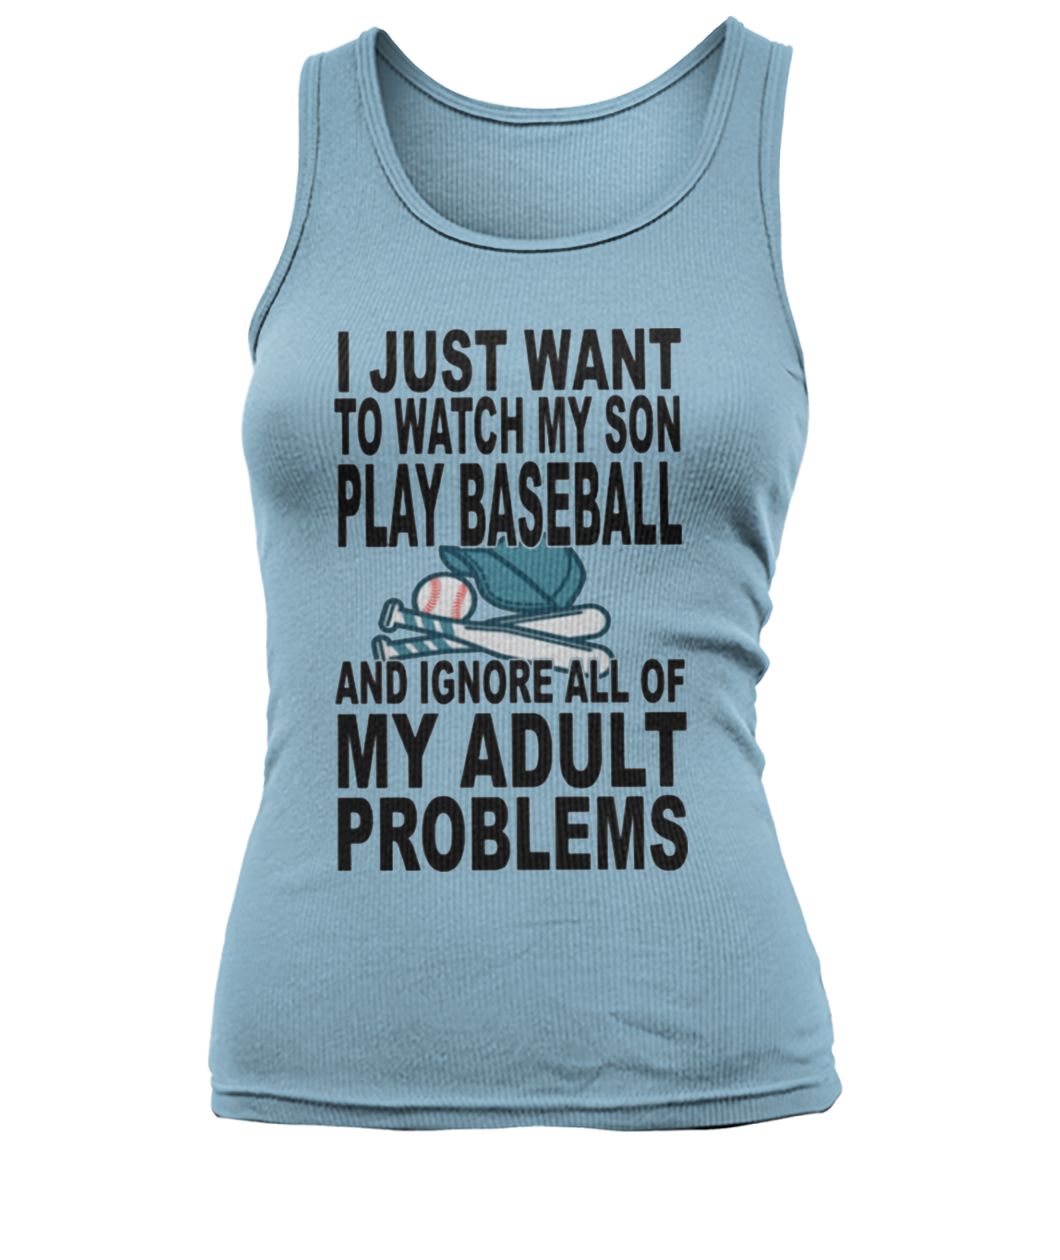 I just want to watch my son play baseball and ignore all of my adult problems women's tank top